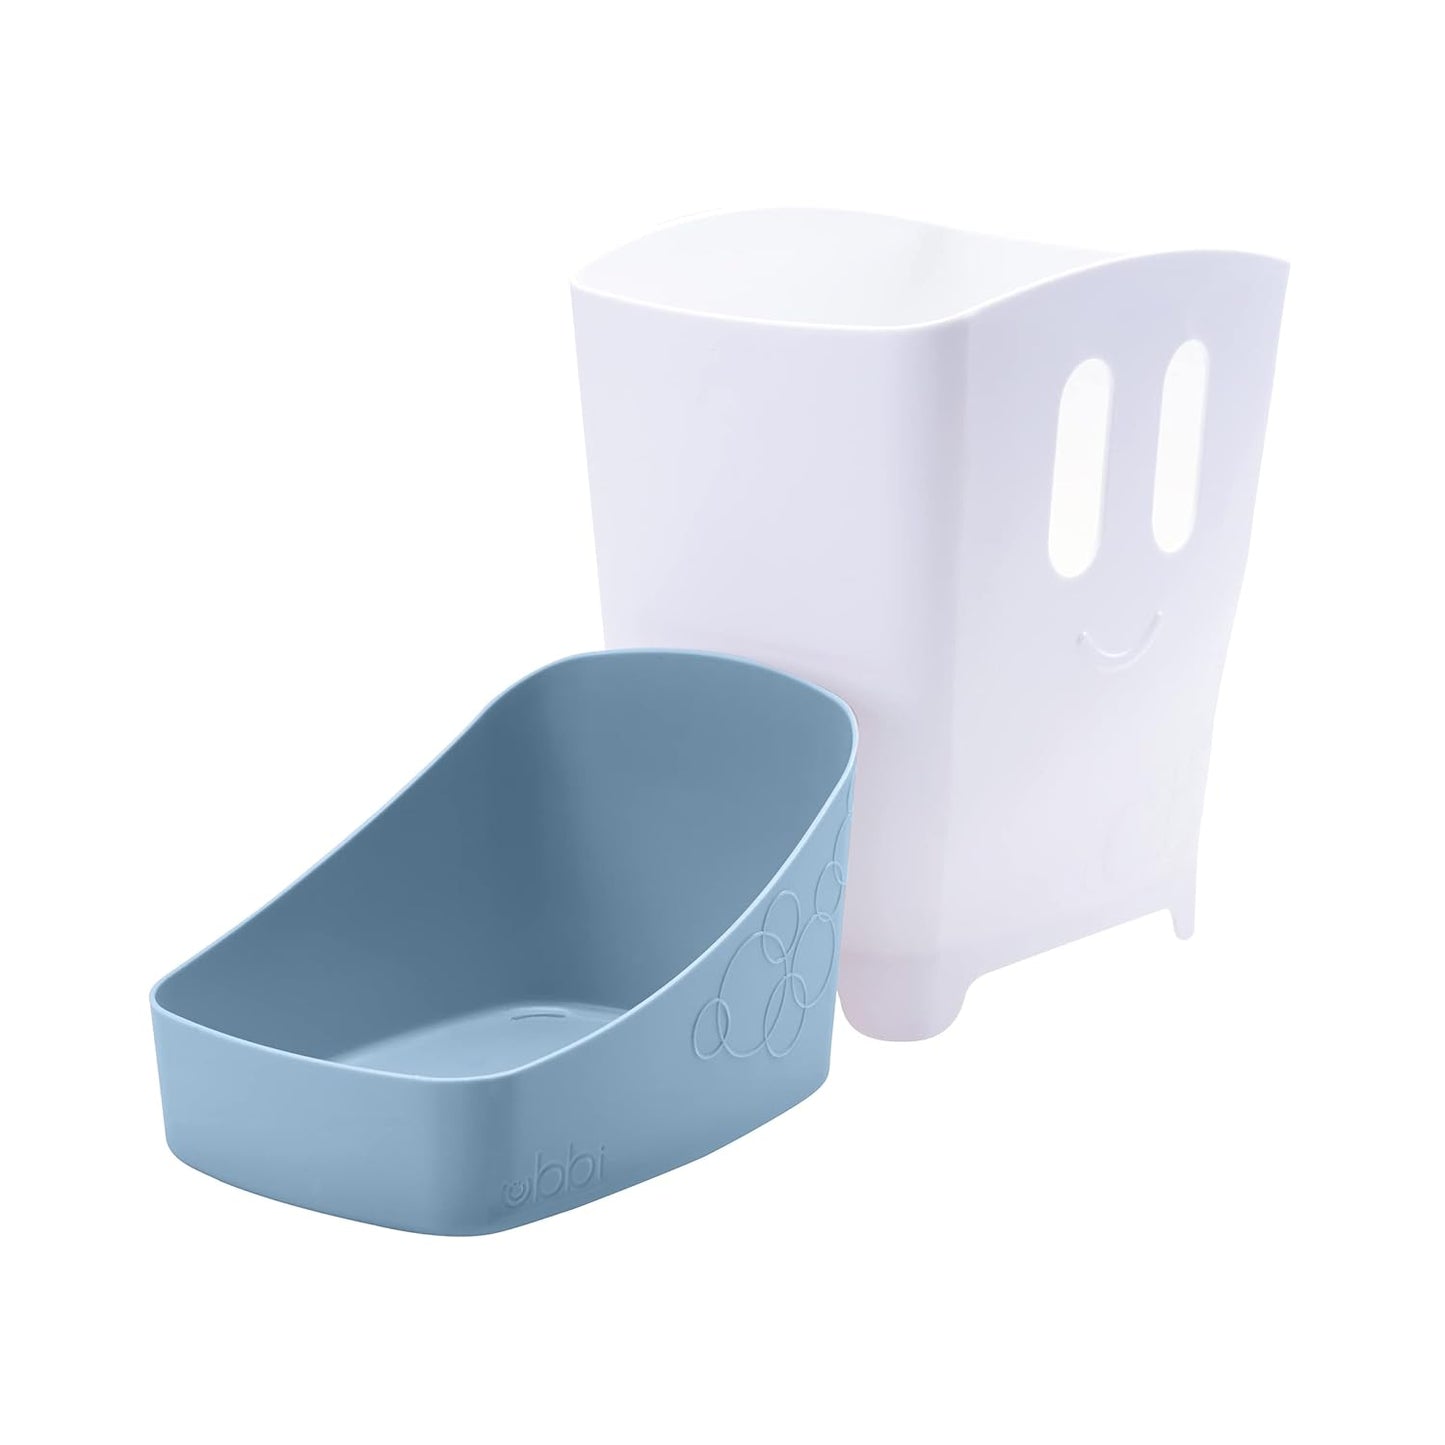 Ubbi Freestanding Bath Toy Organizer Bath Caddy with Removable Drying Rack Bin and Scoop for Toddlers and Baby, Gray